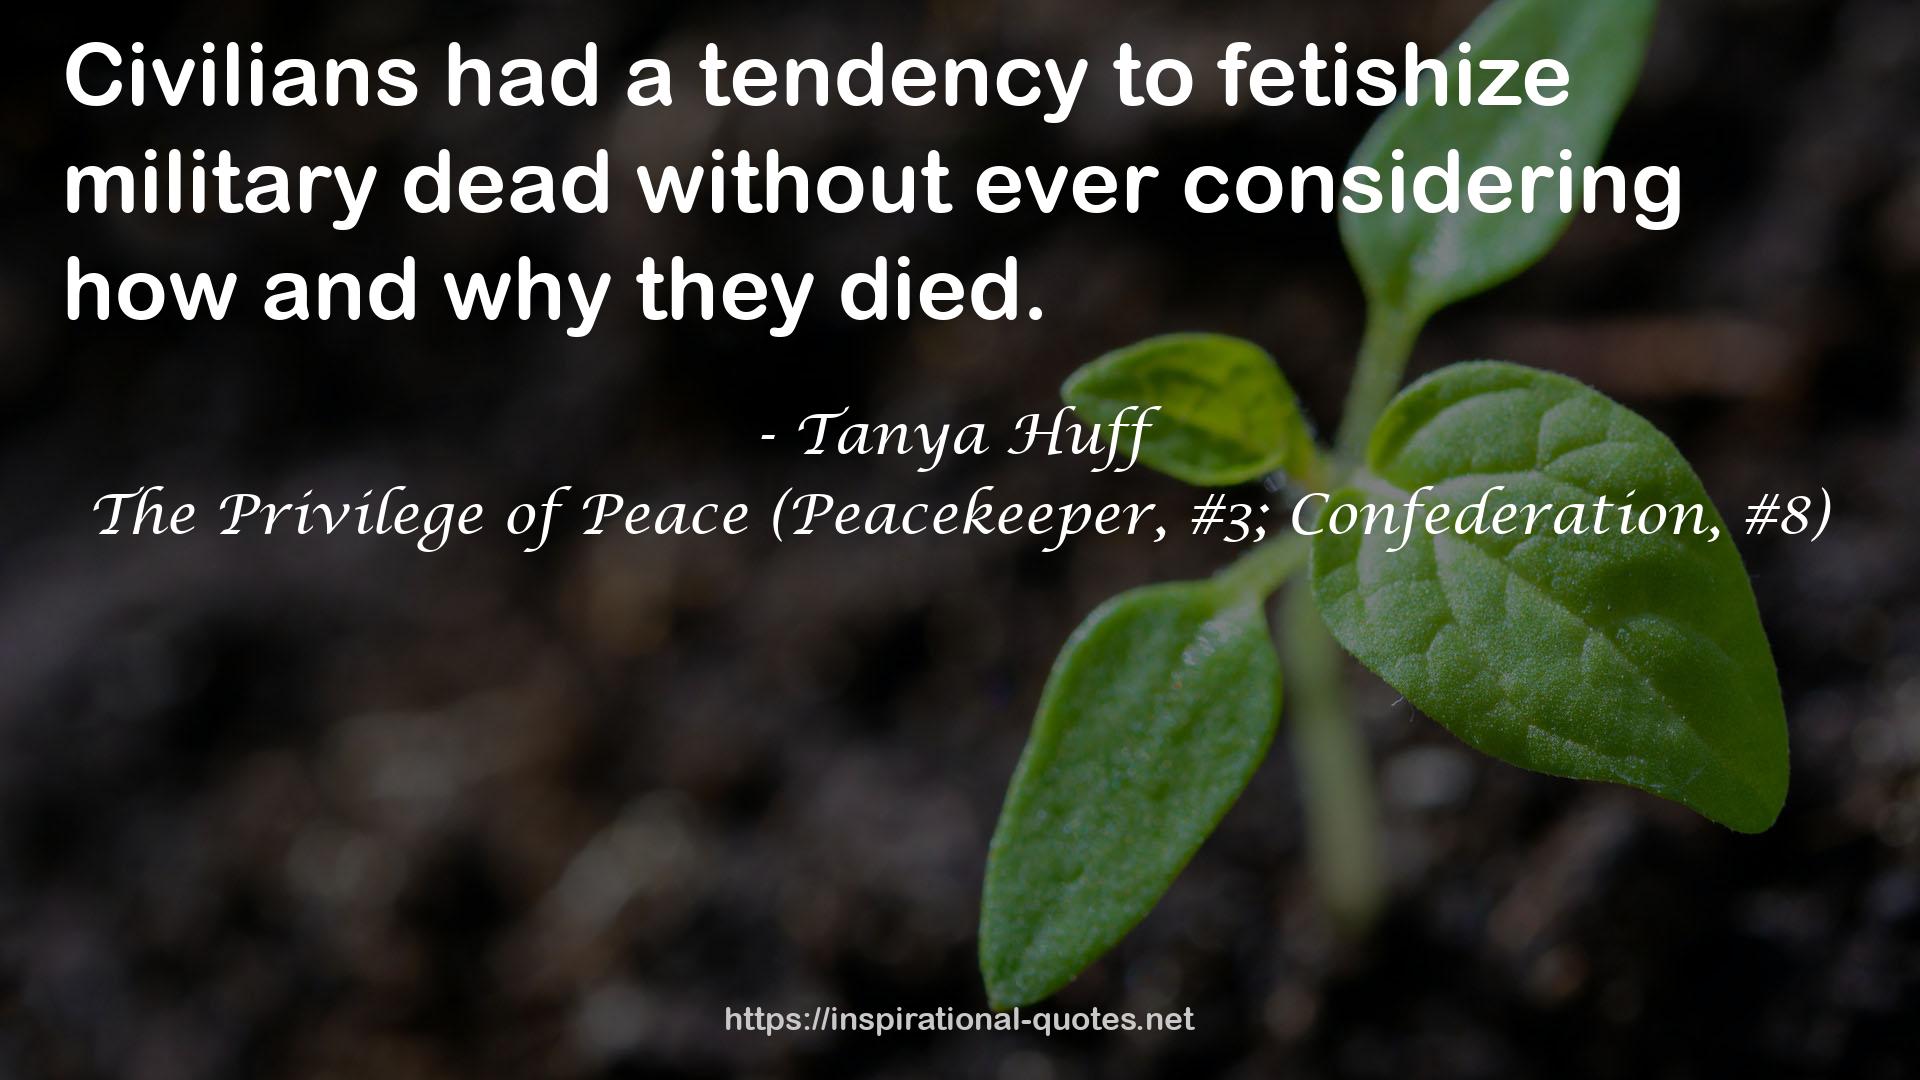 The Privilege of Peace (Peacekeeper, #3; Confederation, #8) QUOTES